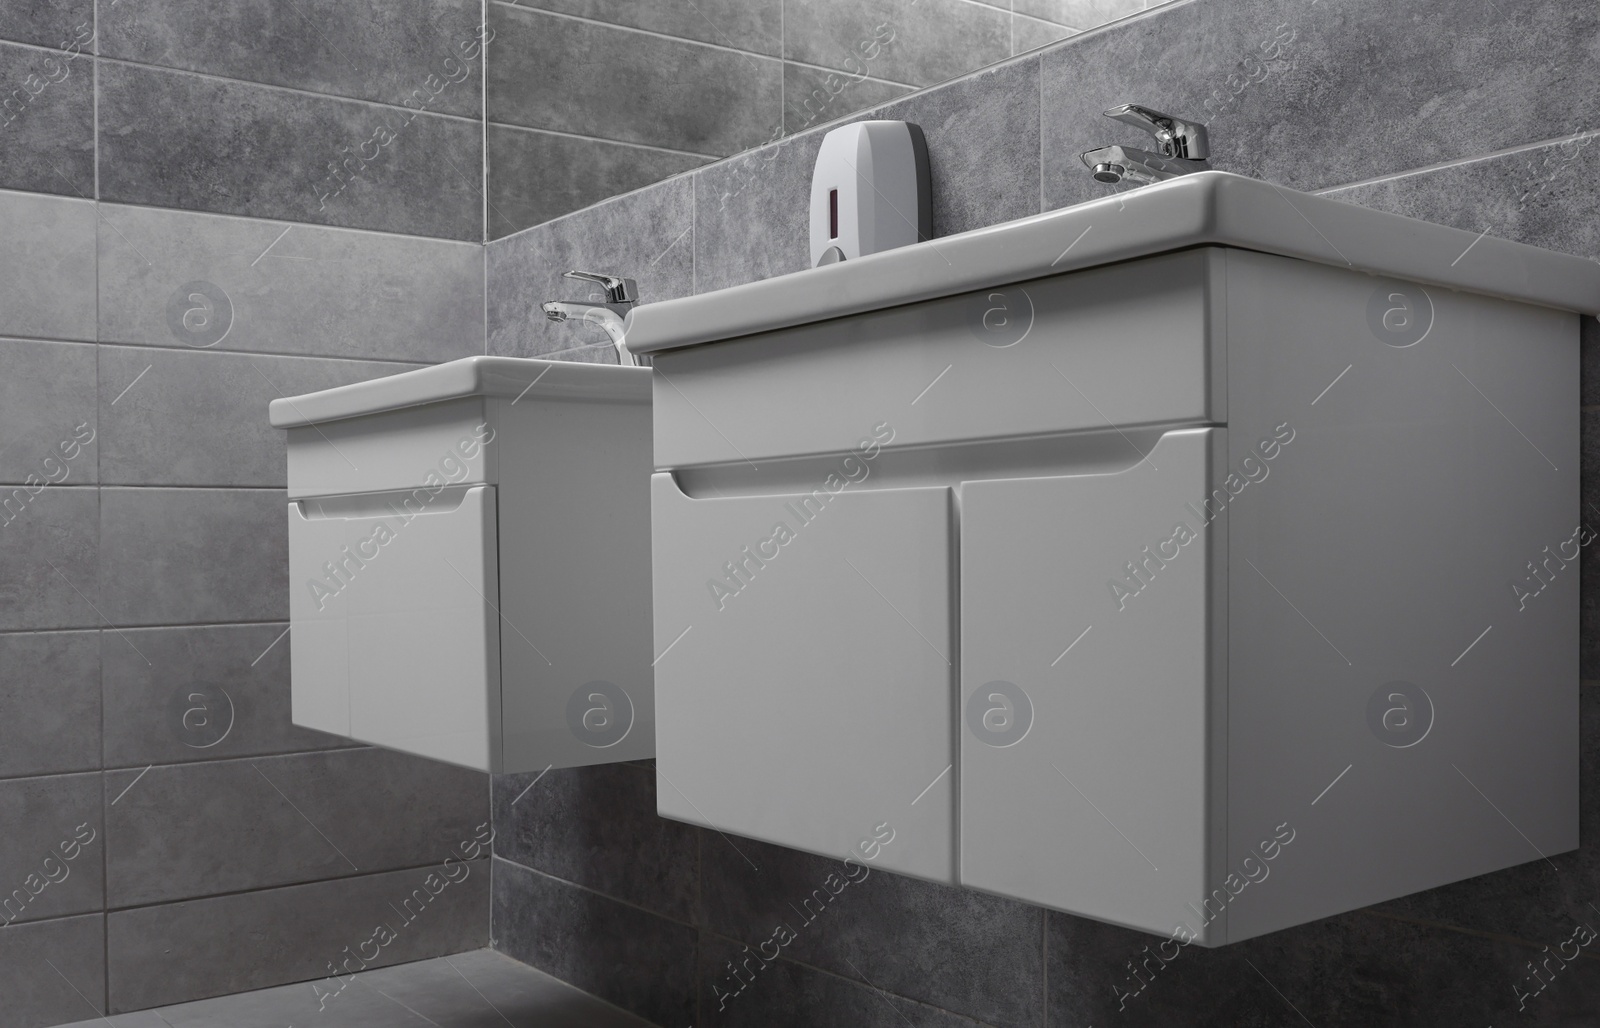 Photo of Public toilet interior with stylish white sinks and grey tiles